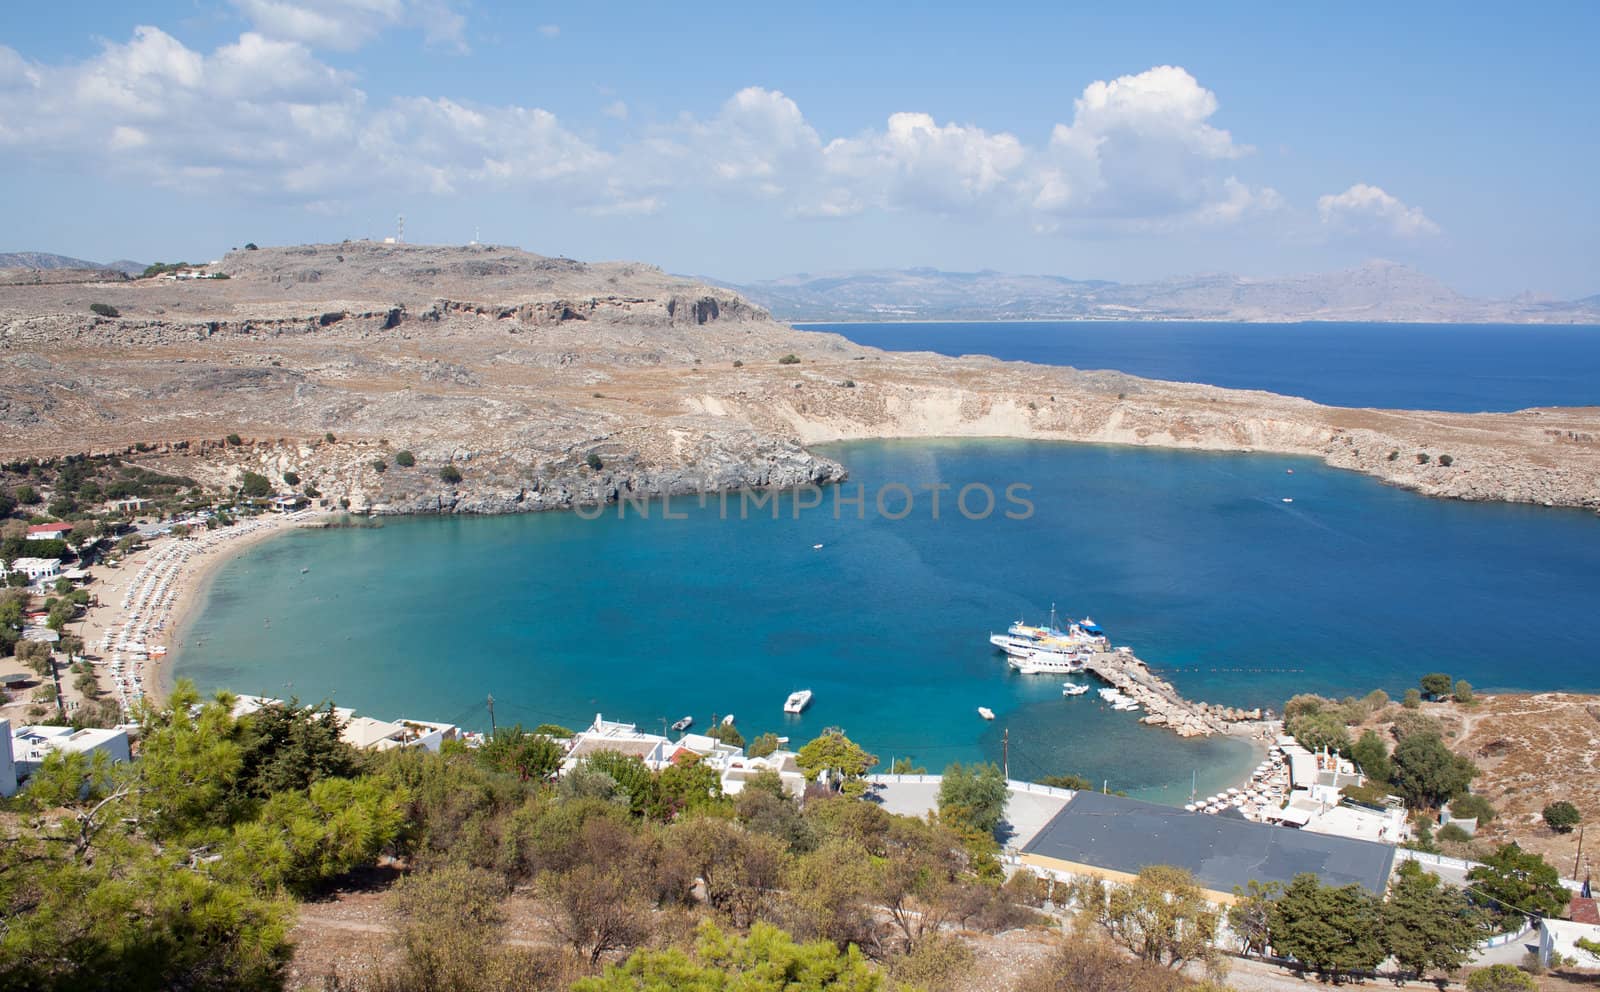 View from above of the main beach in Lindos, Rhodes, one of the Dodecanese Islands in the Aegean Sea, Greece.